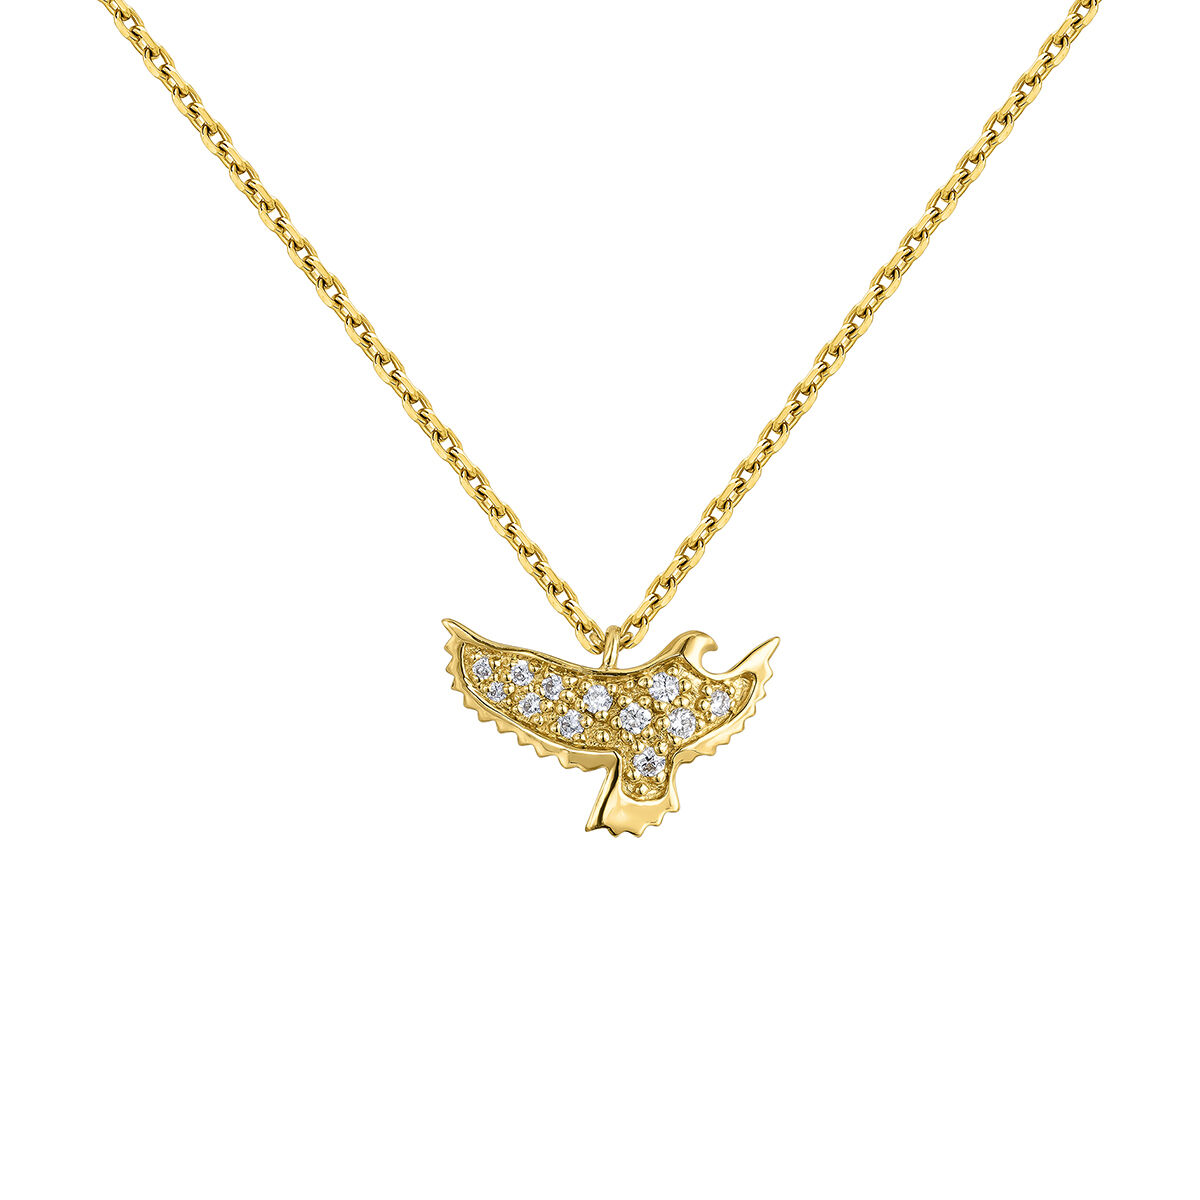 Eagle pendant in 18k yellow gold with diamonds, J05099-02, hi-res